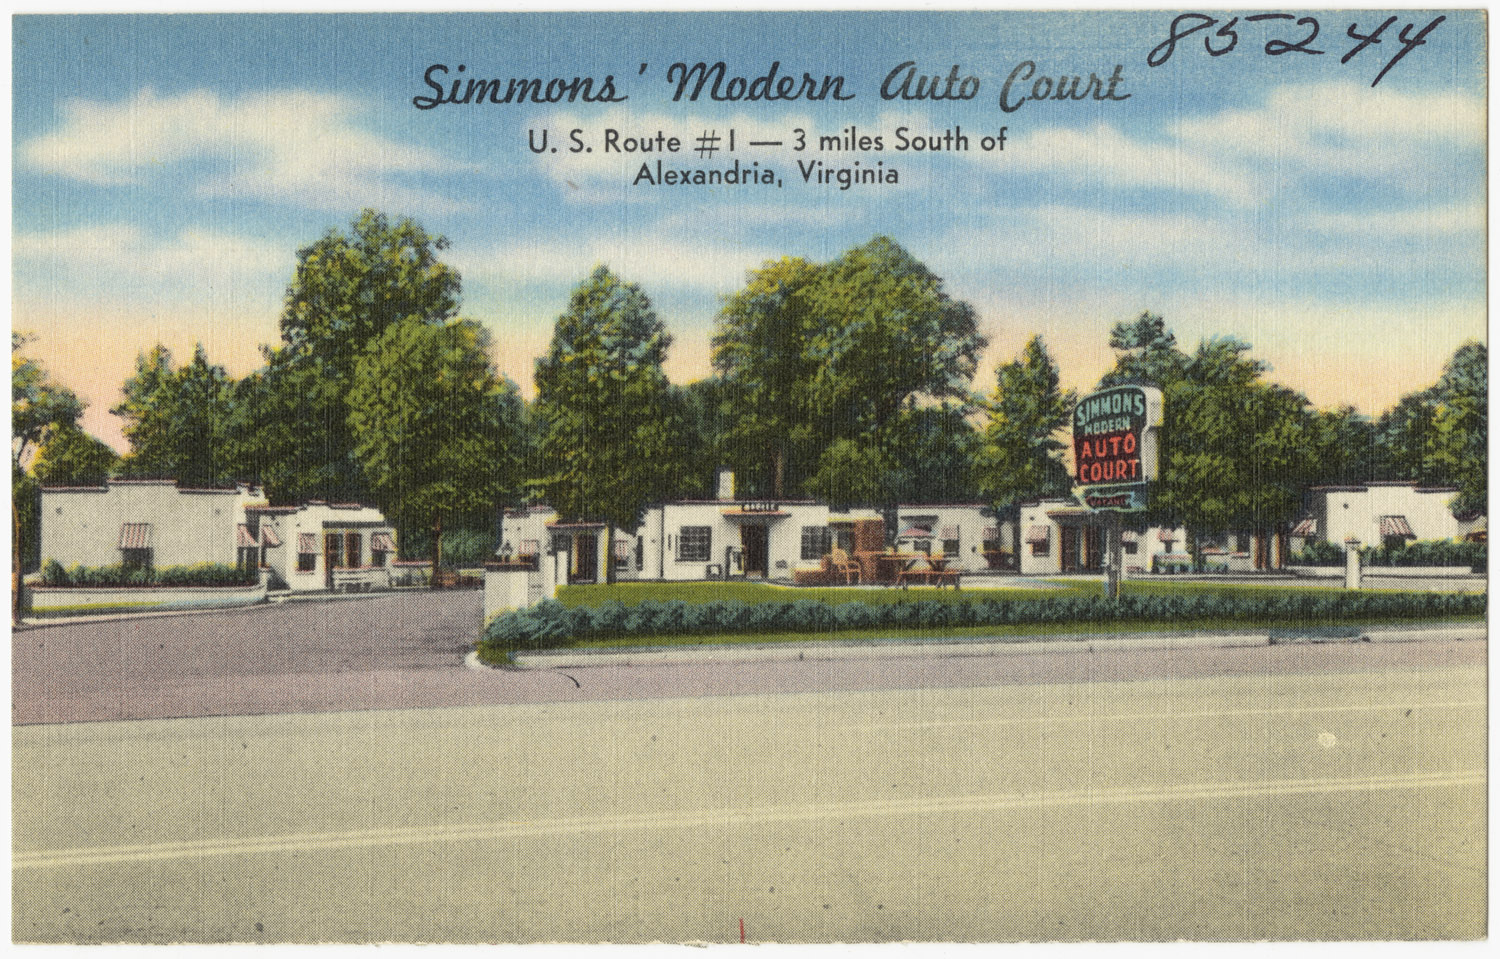 a postcard showing a motel named summer madison